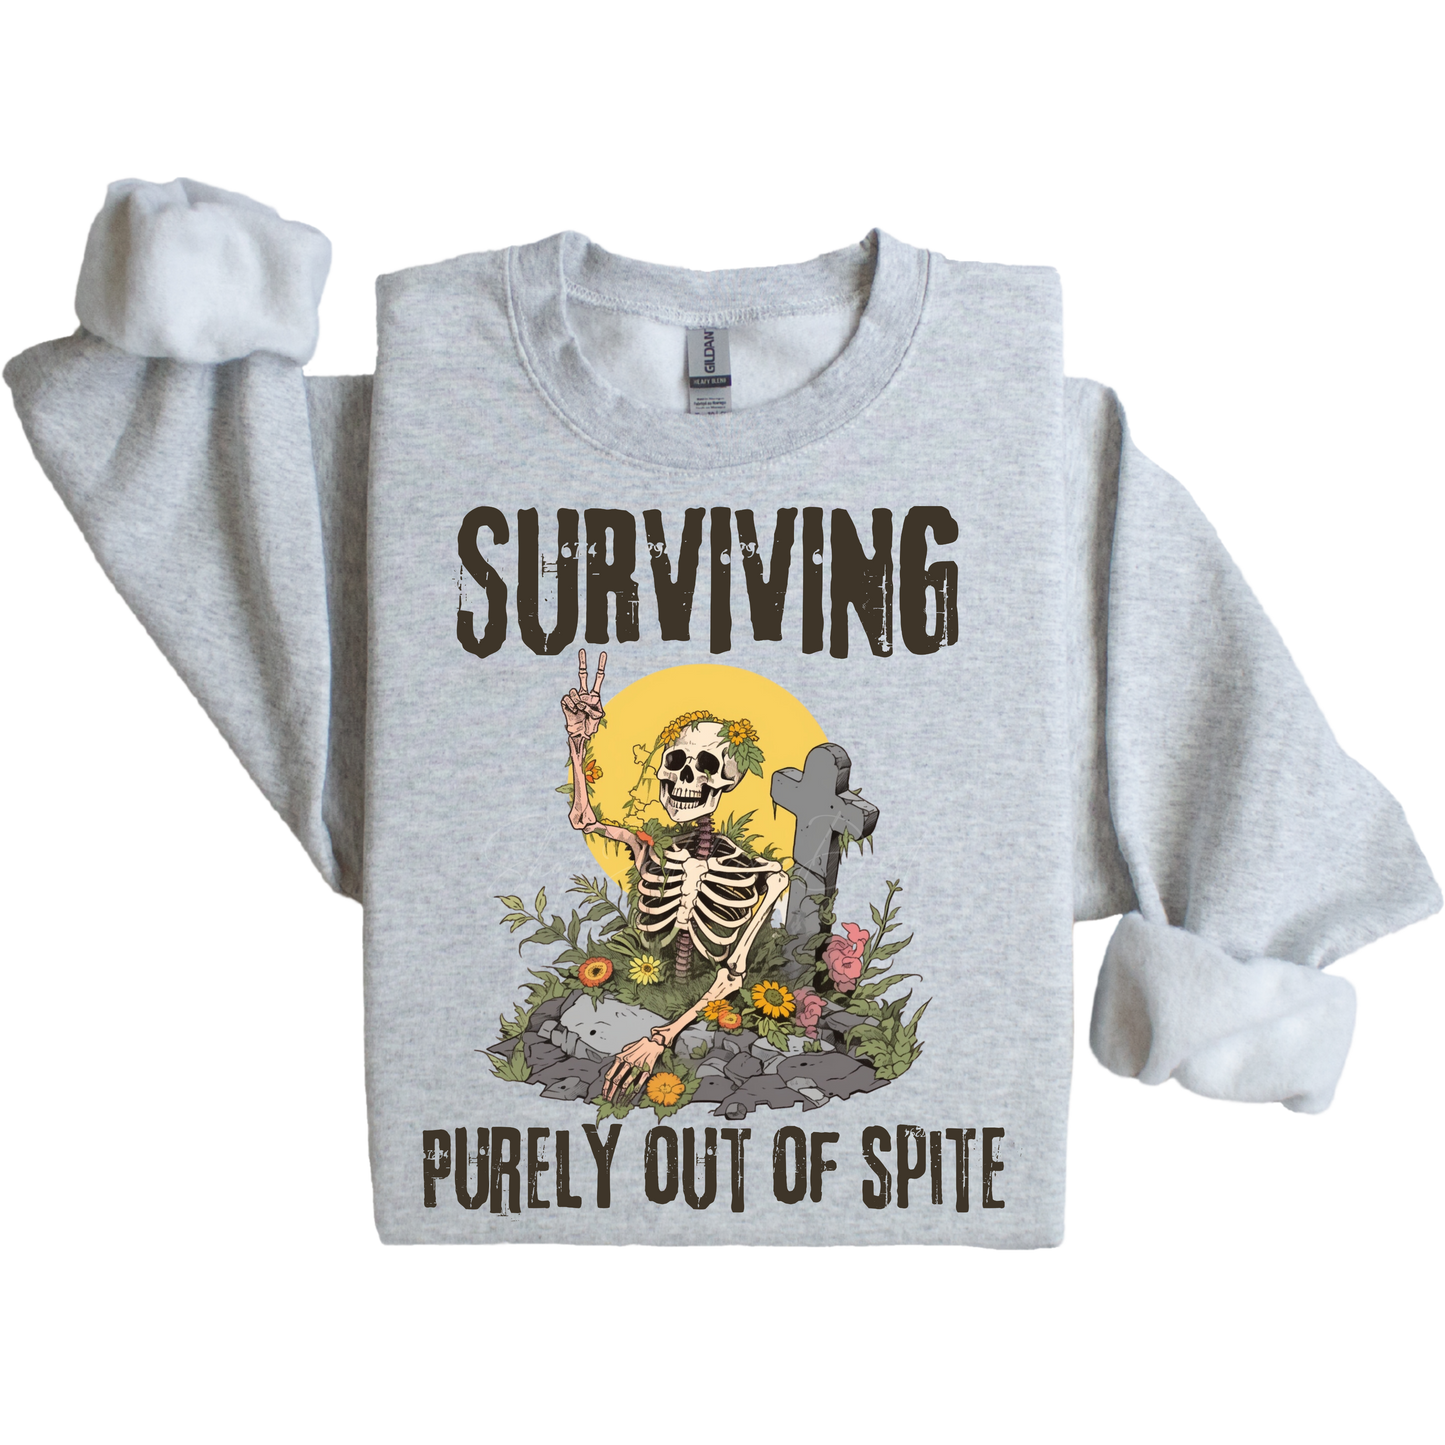 Surviving Out of Spite